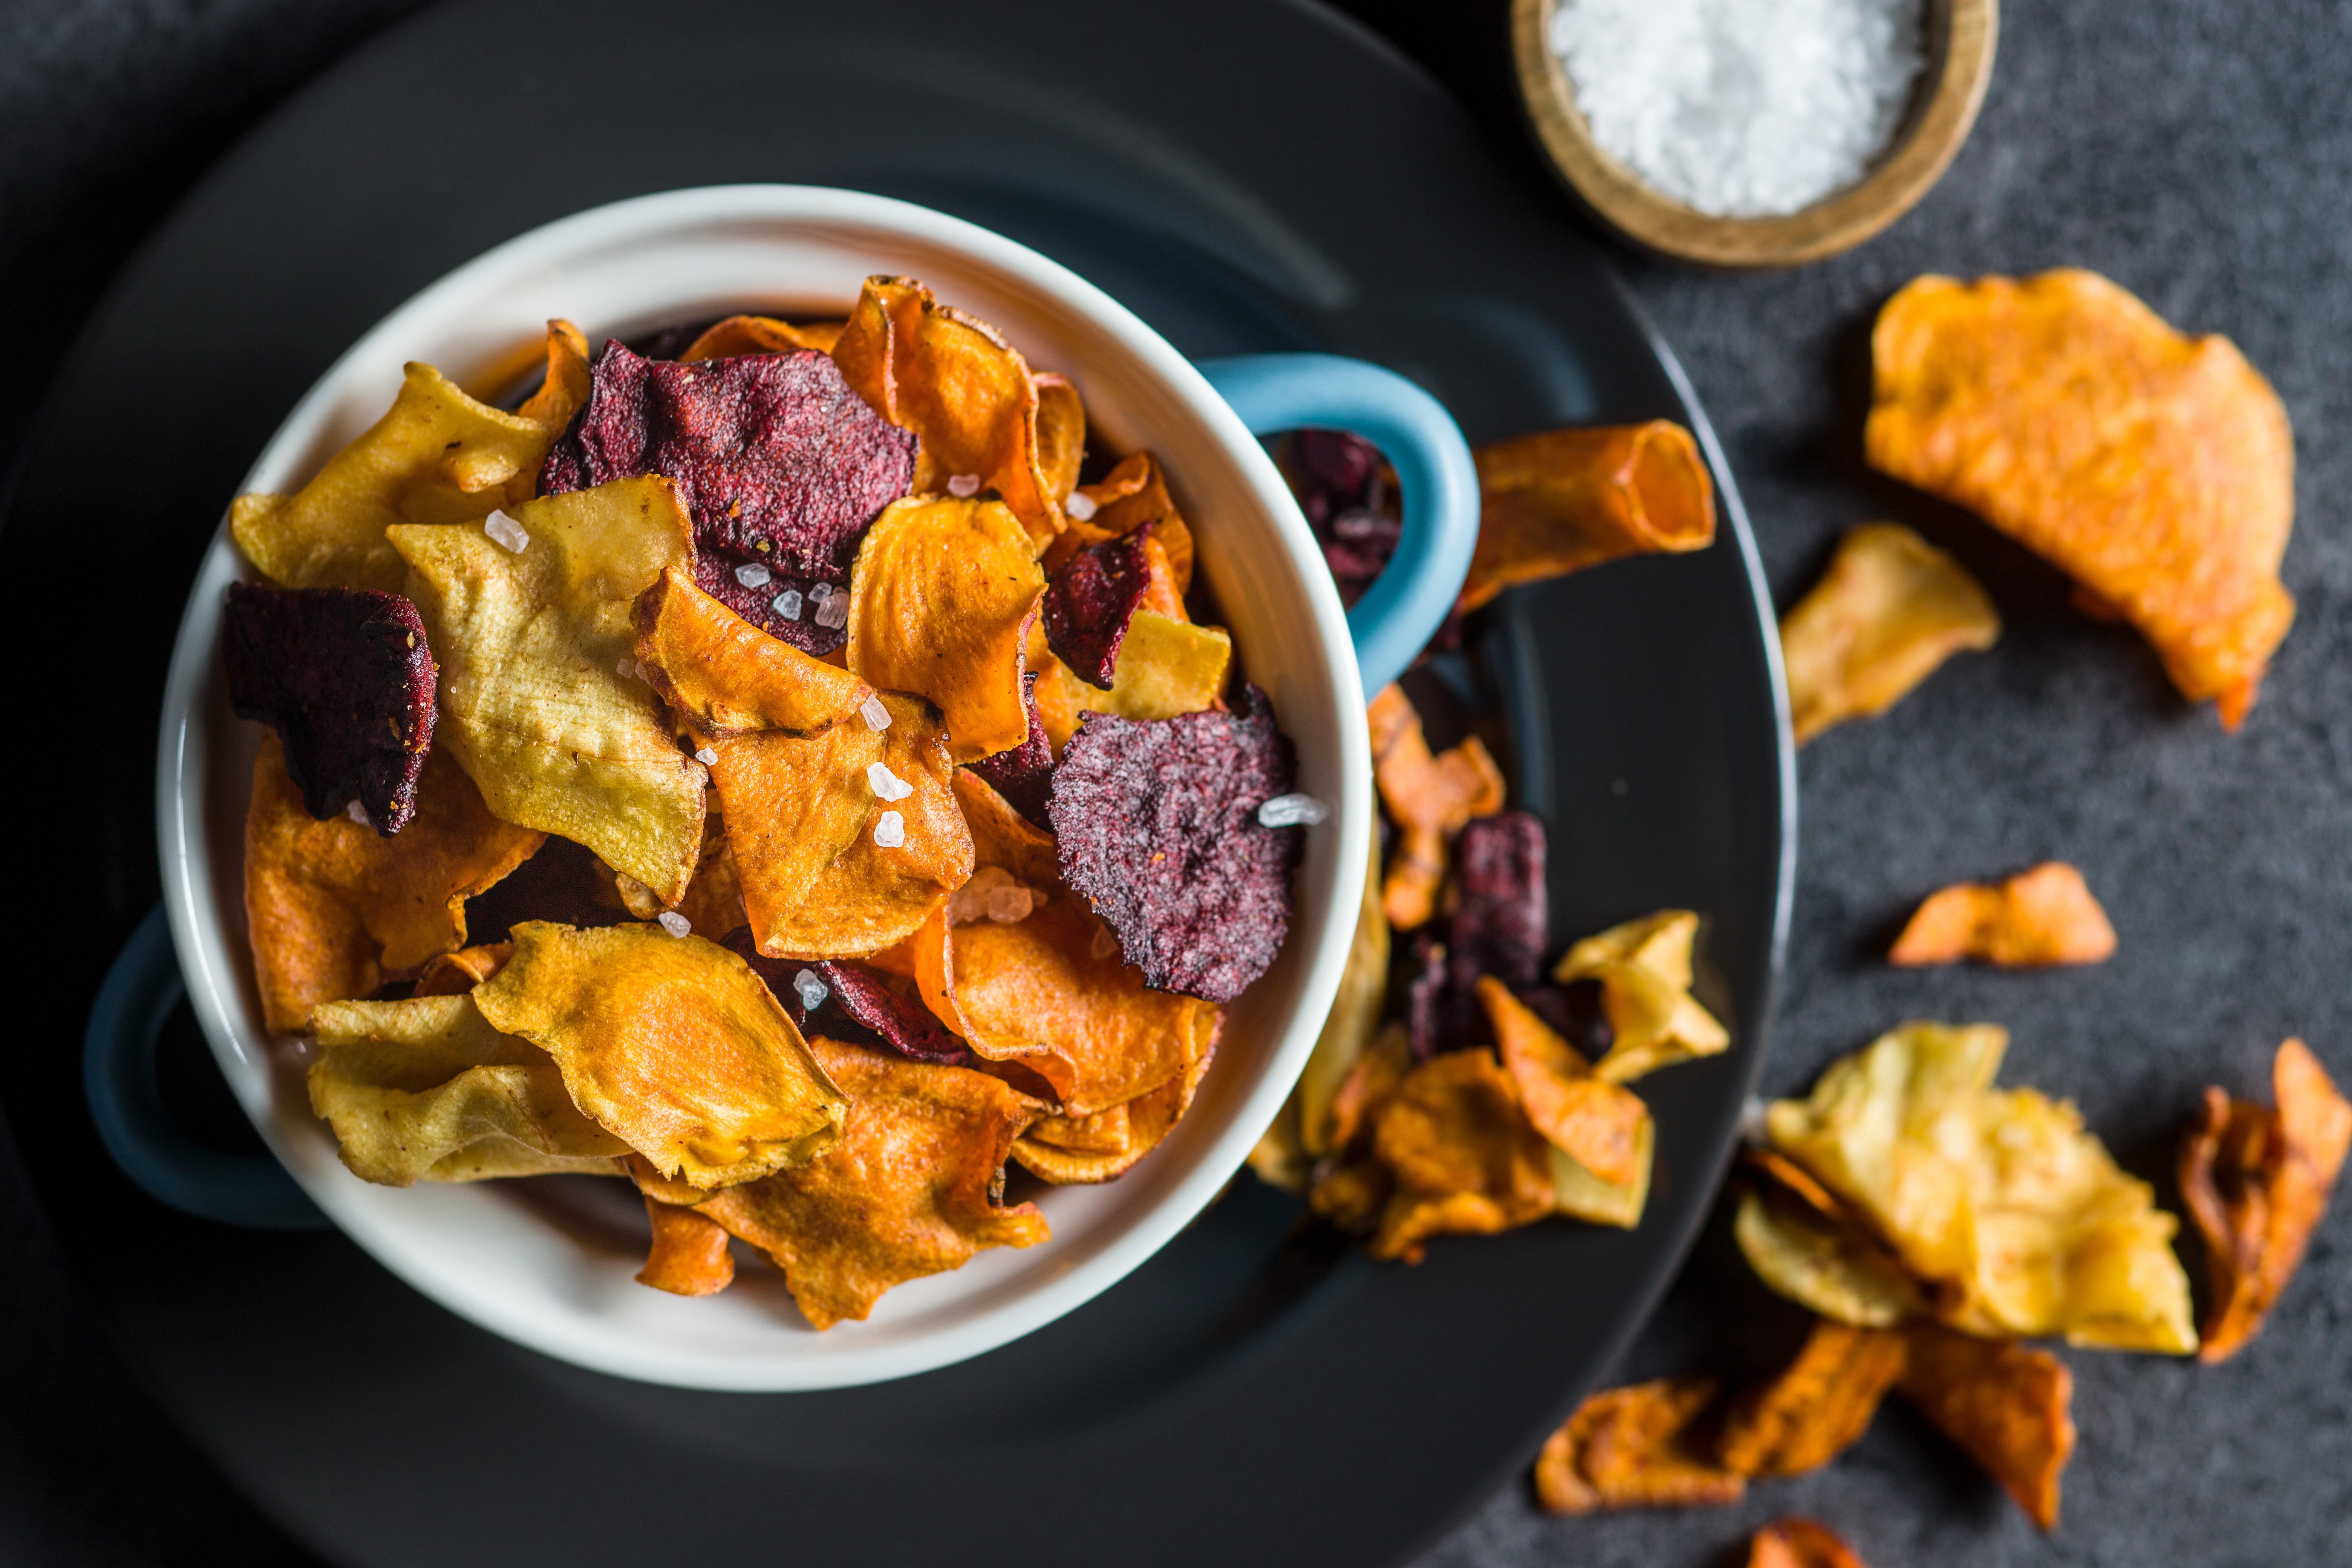 The Consumer Council warns people to be more aware of the risks in thinking vegetable chips are more healthy than potato chips. Photo: Alamy